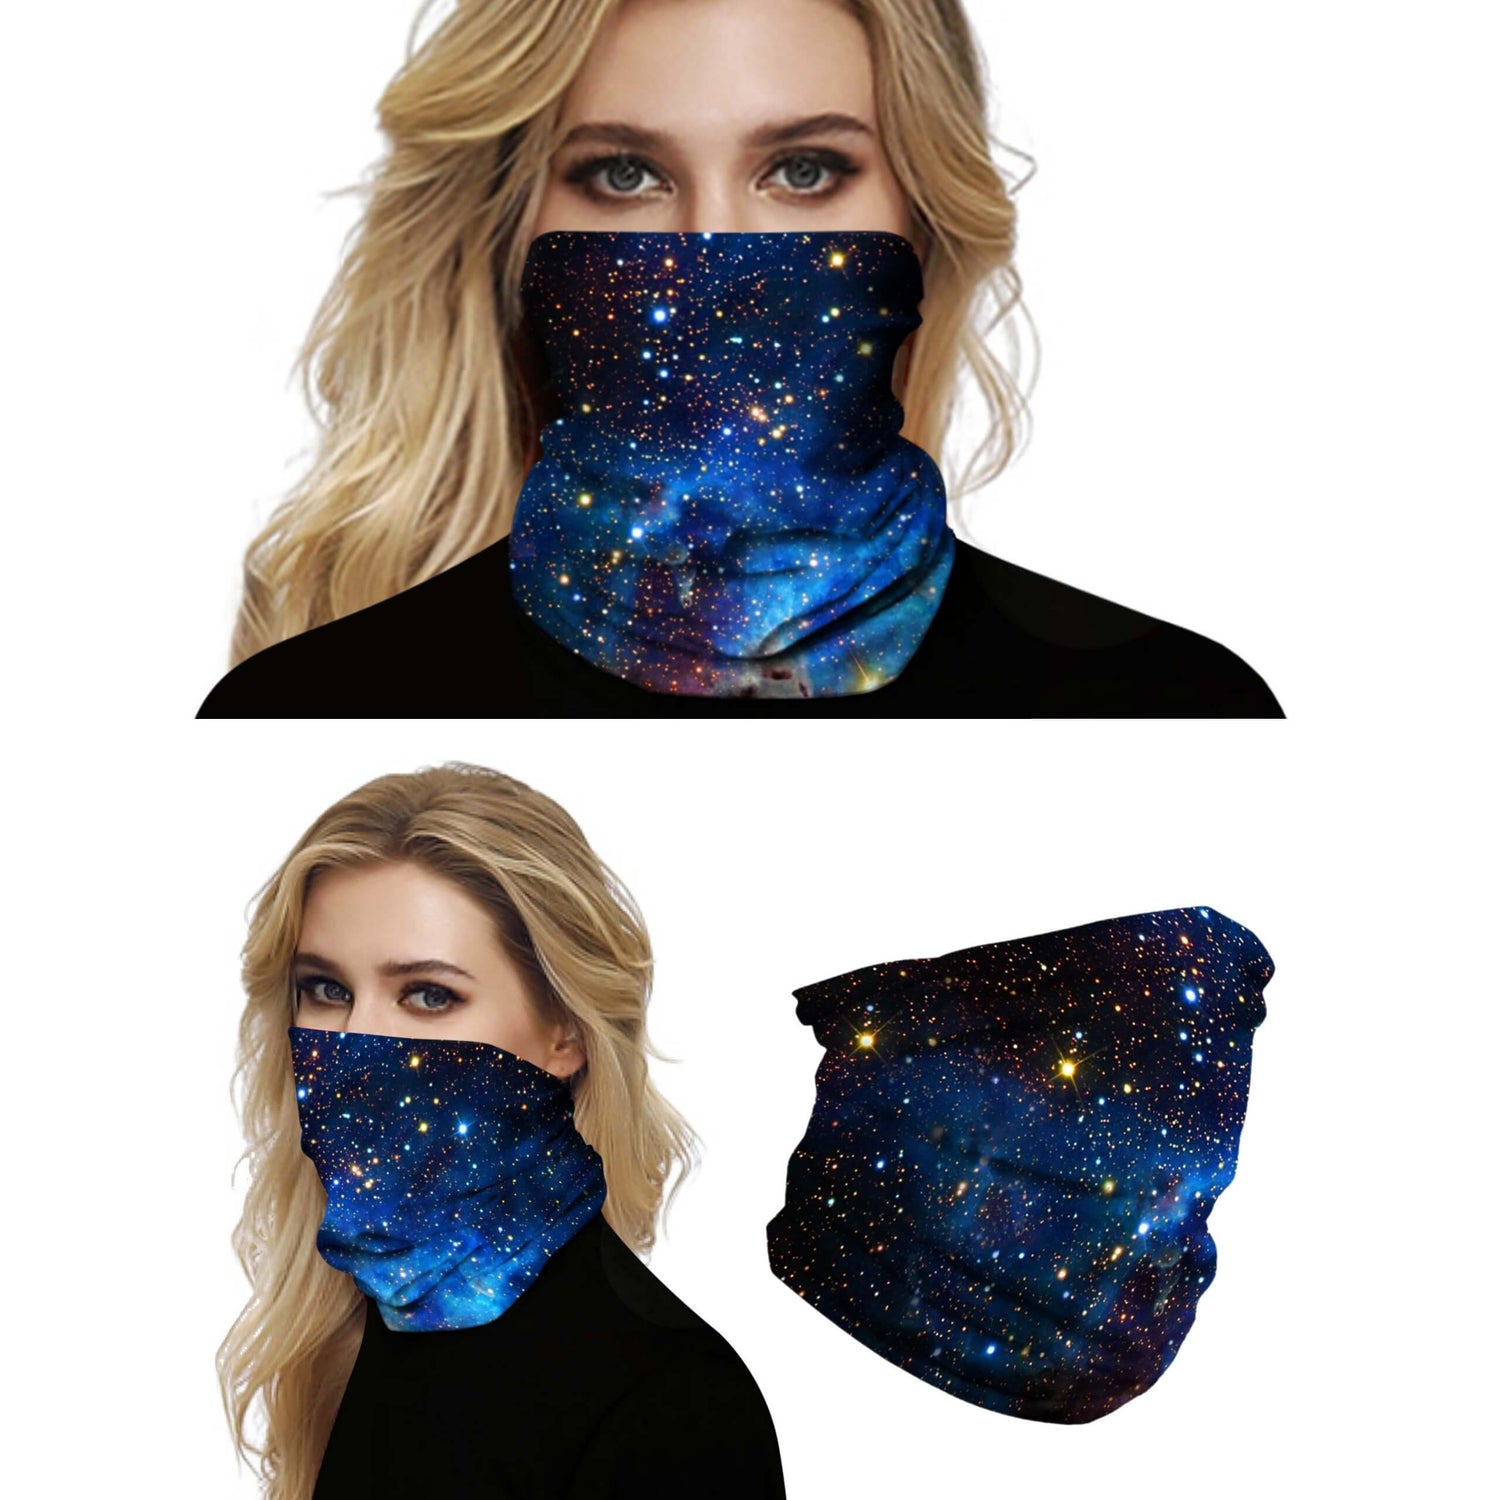 This Galaxy Print Multifunctional Neck Gaiter - Galaxy E is so versatile that there are 16+ ways to wear it - neckerchief, headband, wristband, mask, hair-band, balaclava, face mask, face scarf, seamless mask, beanie, bandana, mouth mask, neck gaiter and more. Perfect for all sorts of outdoor activities including hiking, fishing, skiing, cycling, skating etc with UV protection and odor control.